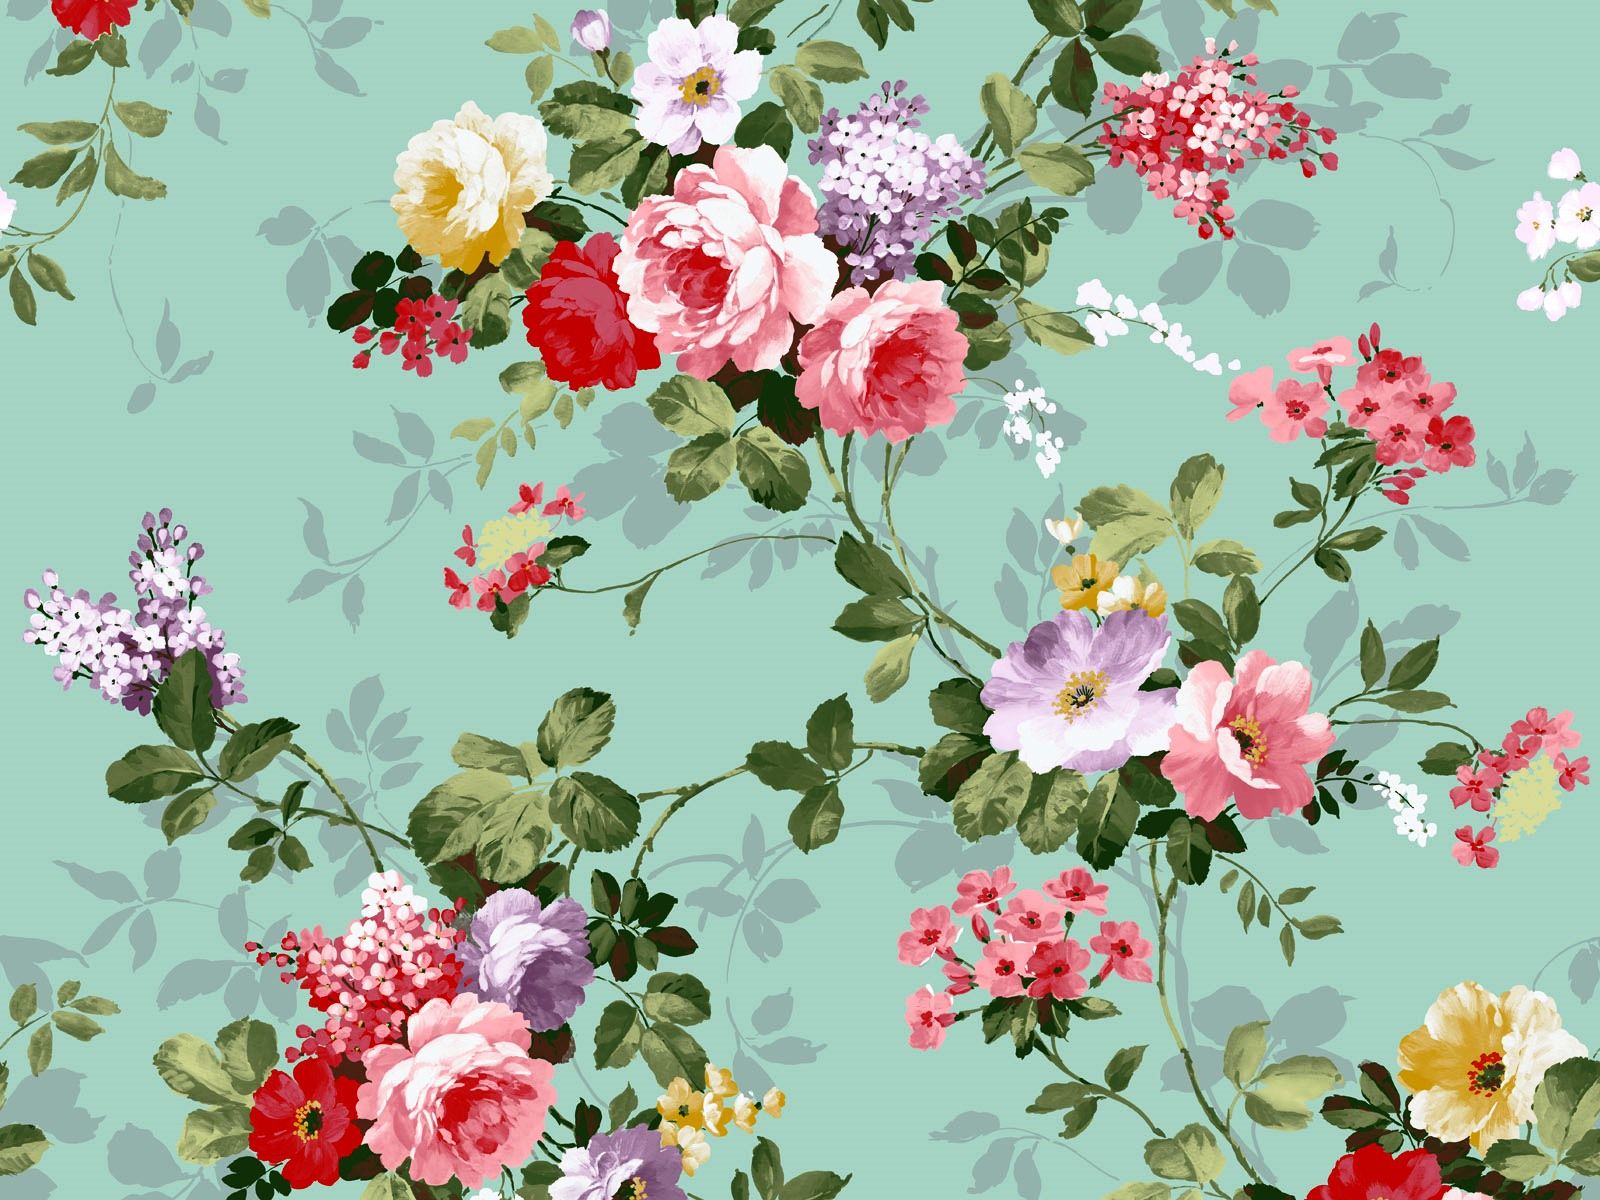 floral background tumblr wallpaper high quality | Patterns ...